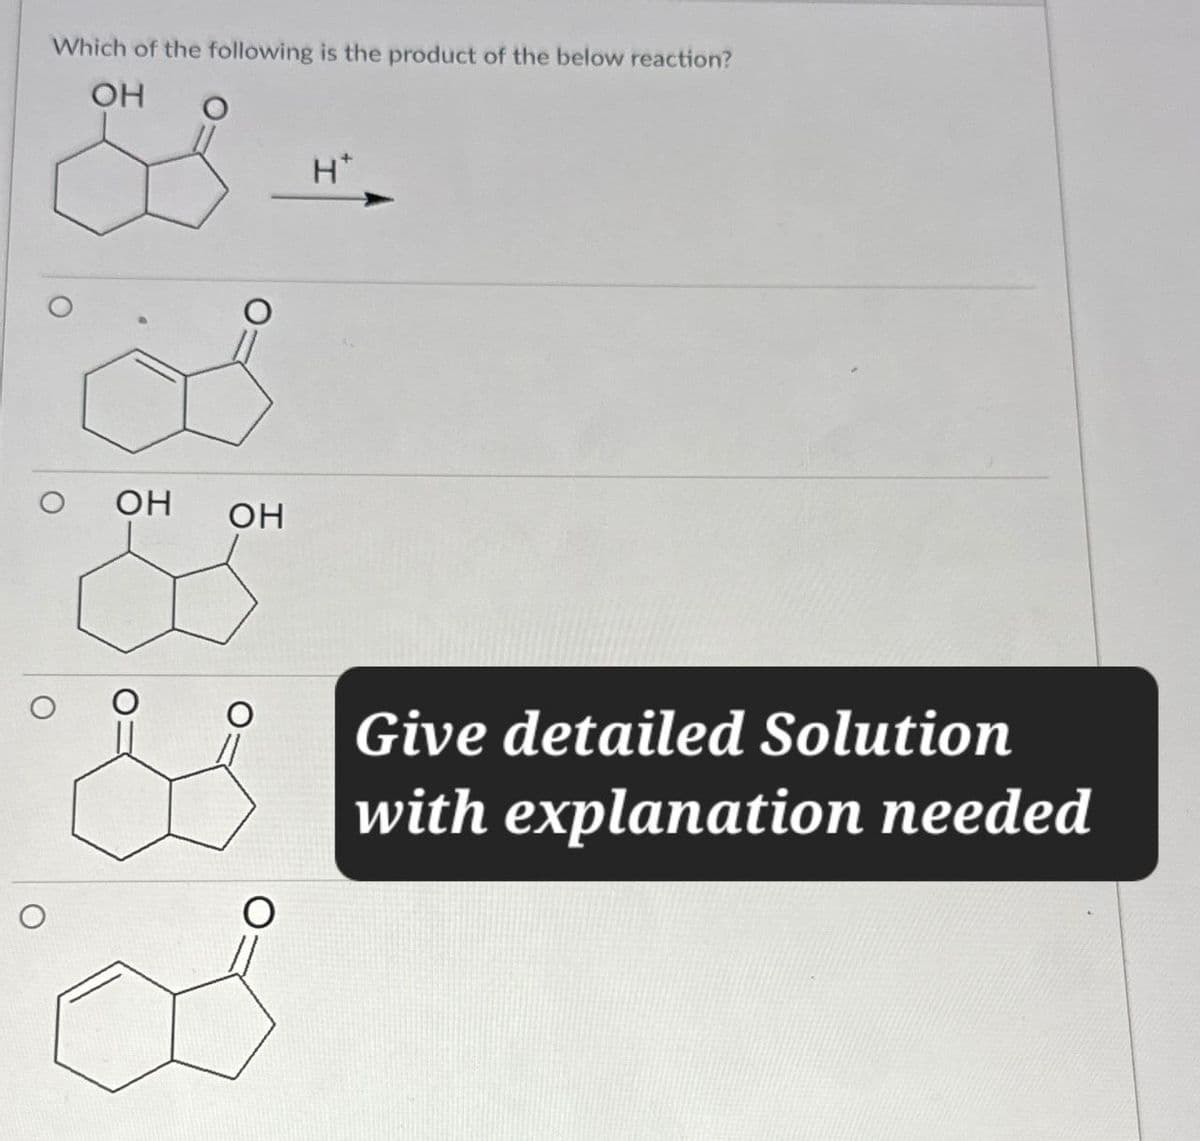 Which of the following is the product of the below reaction?
OH
OH
OH
H*
O
Give detailed Solution
with explanation needed